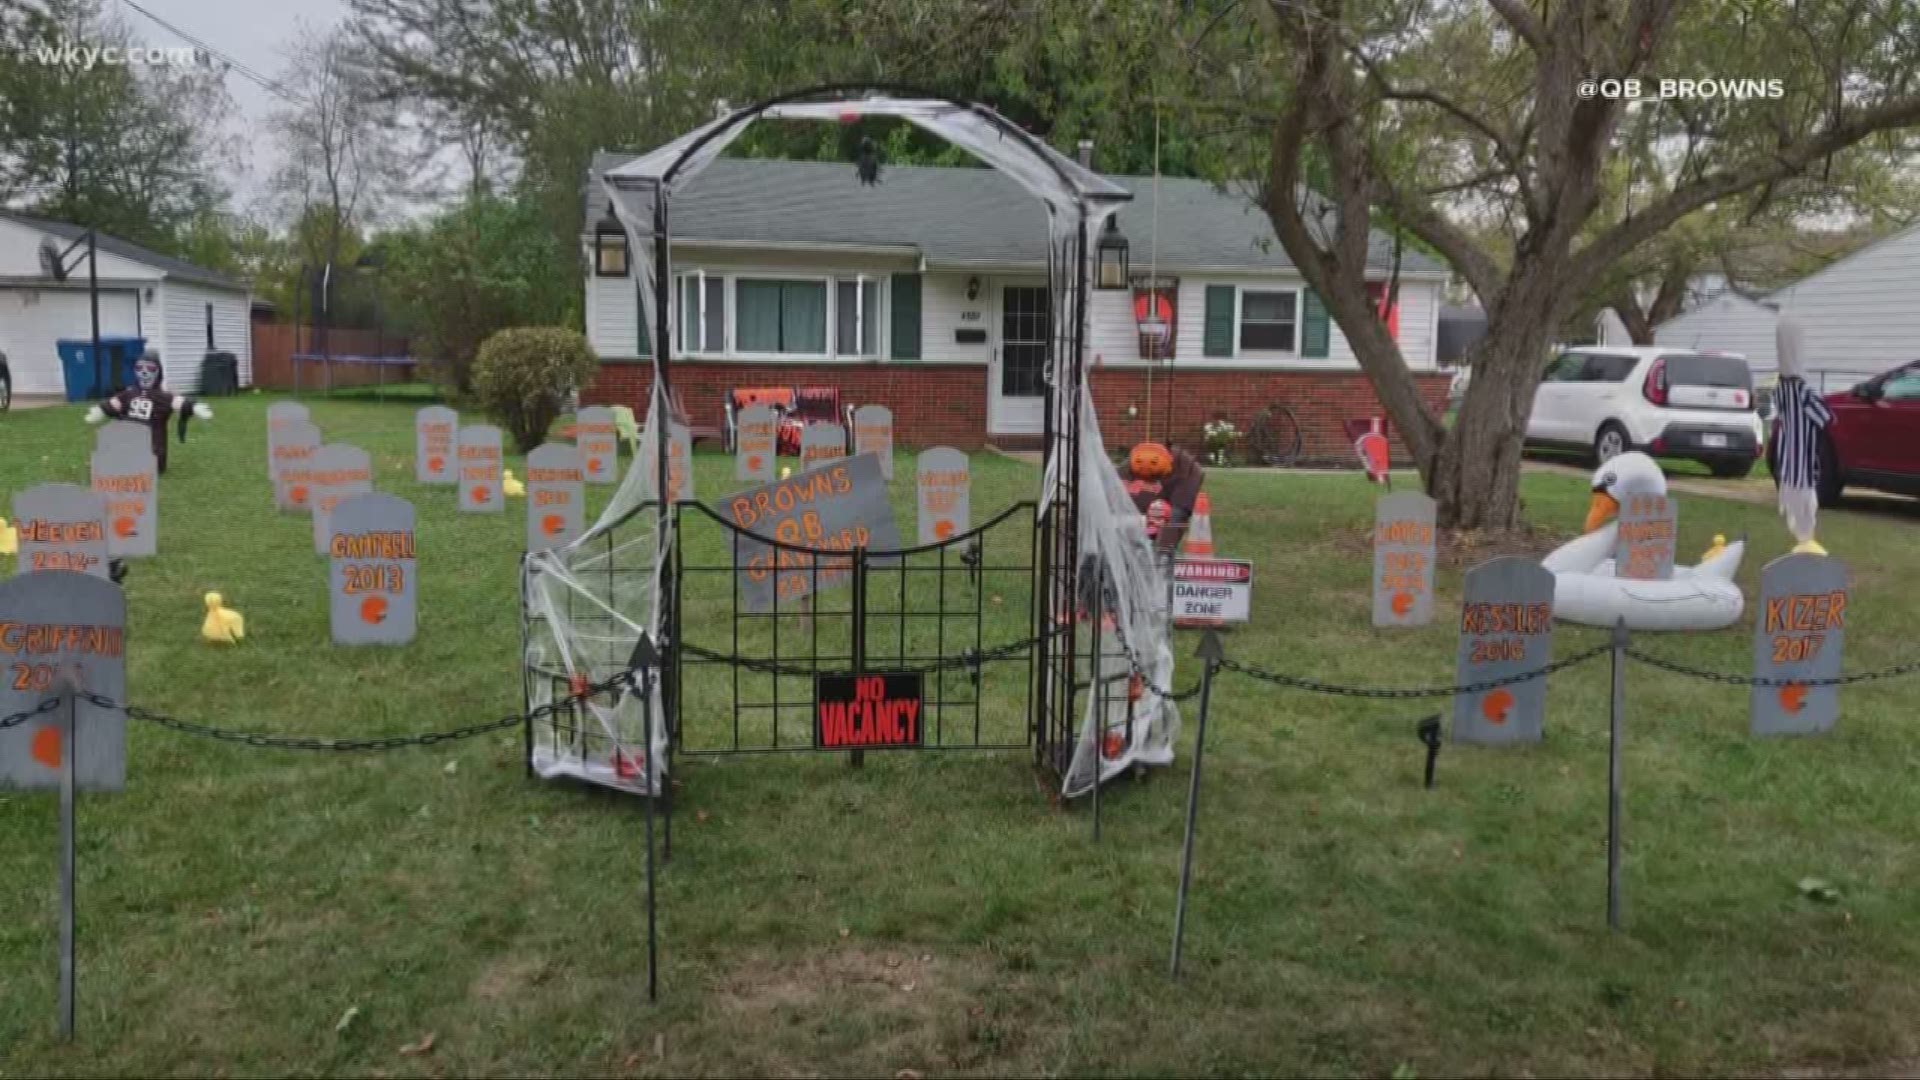 The Cleveland Browns QB graveyard is back for Halloween, but its creator has officially closed it, thanks to Baker Mayfield.